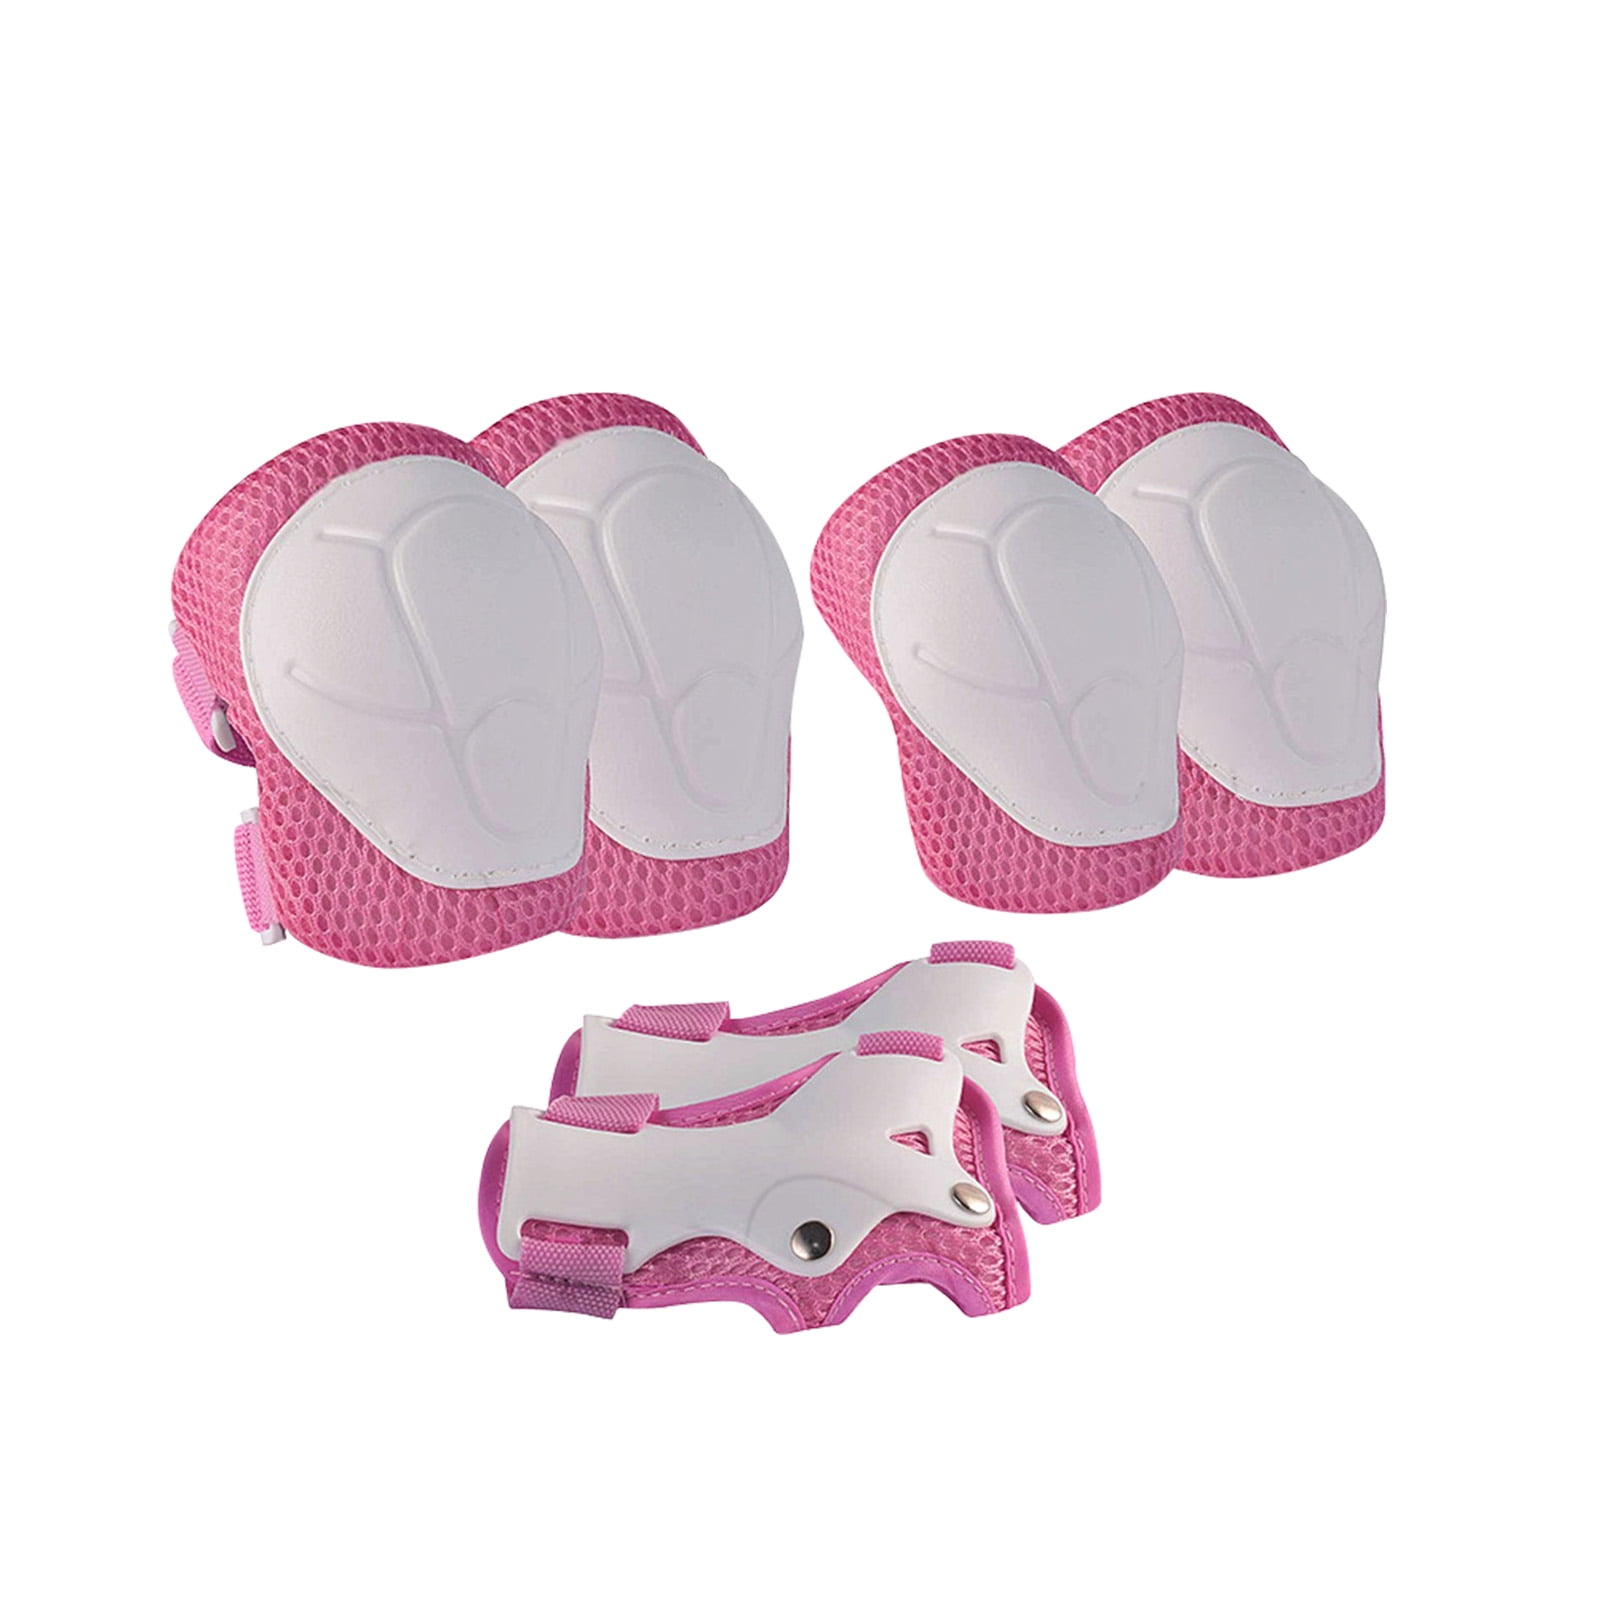 Details about   6PCS Kids Protective Gear Knee Pads Elbow Wrist Roller Skating Safety Protect I 